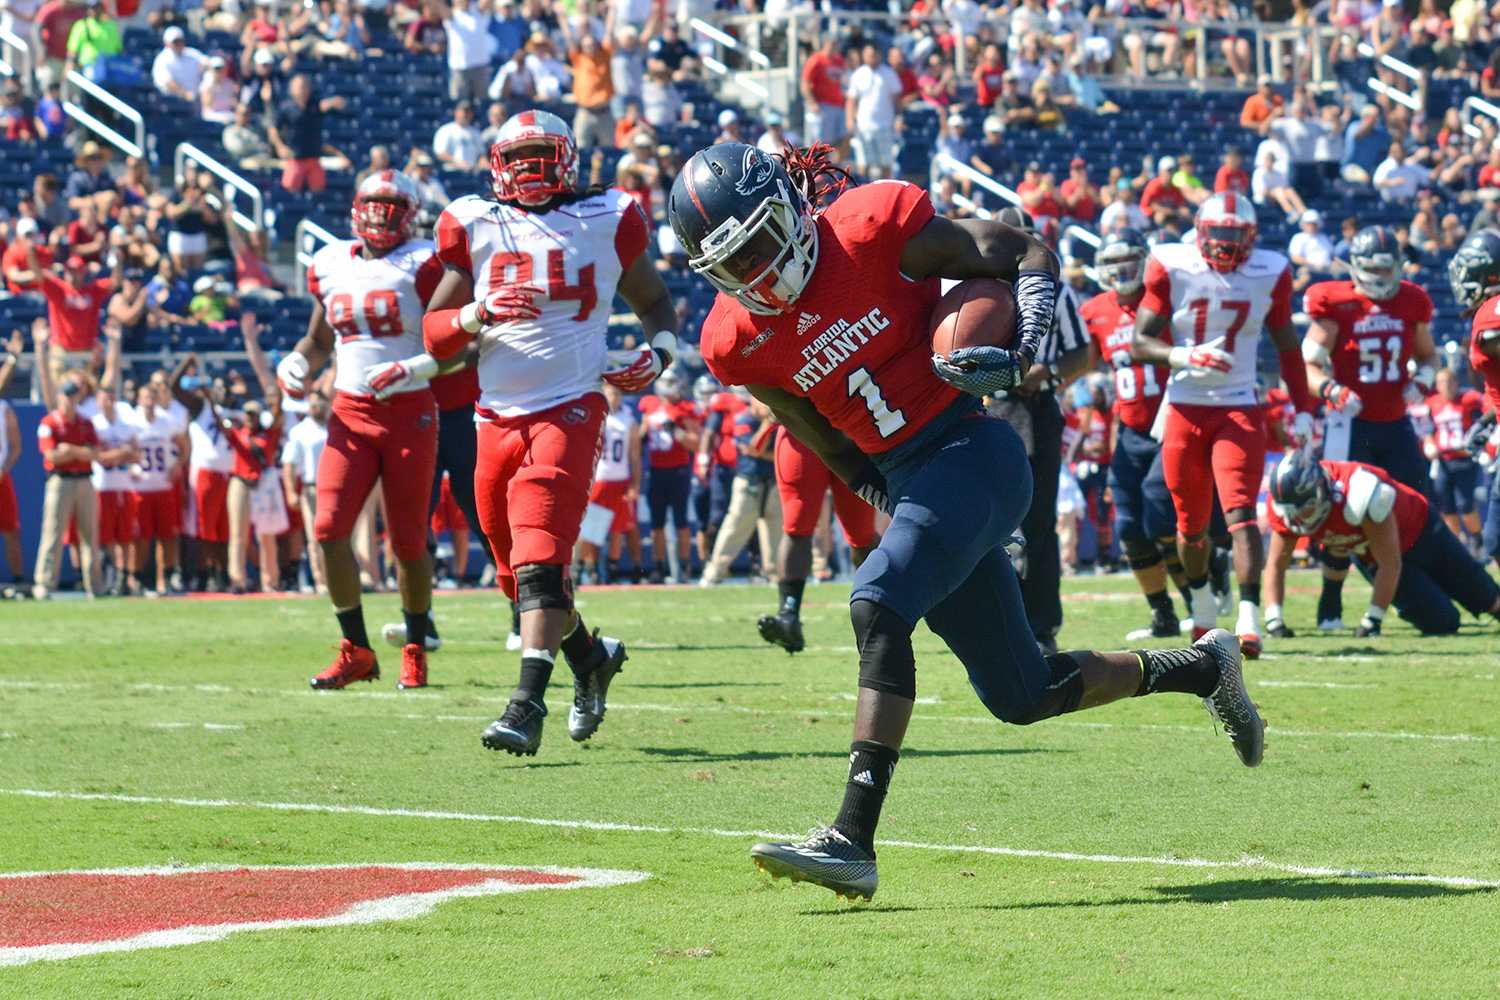 Ryan Murphy | Business Manager Owl wide receiver Lucky Whitehead makes his way into the endzone for his first of his two touchdowns during Saturday’s game against WKU. 